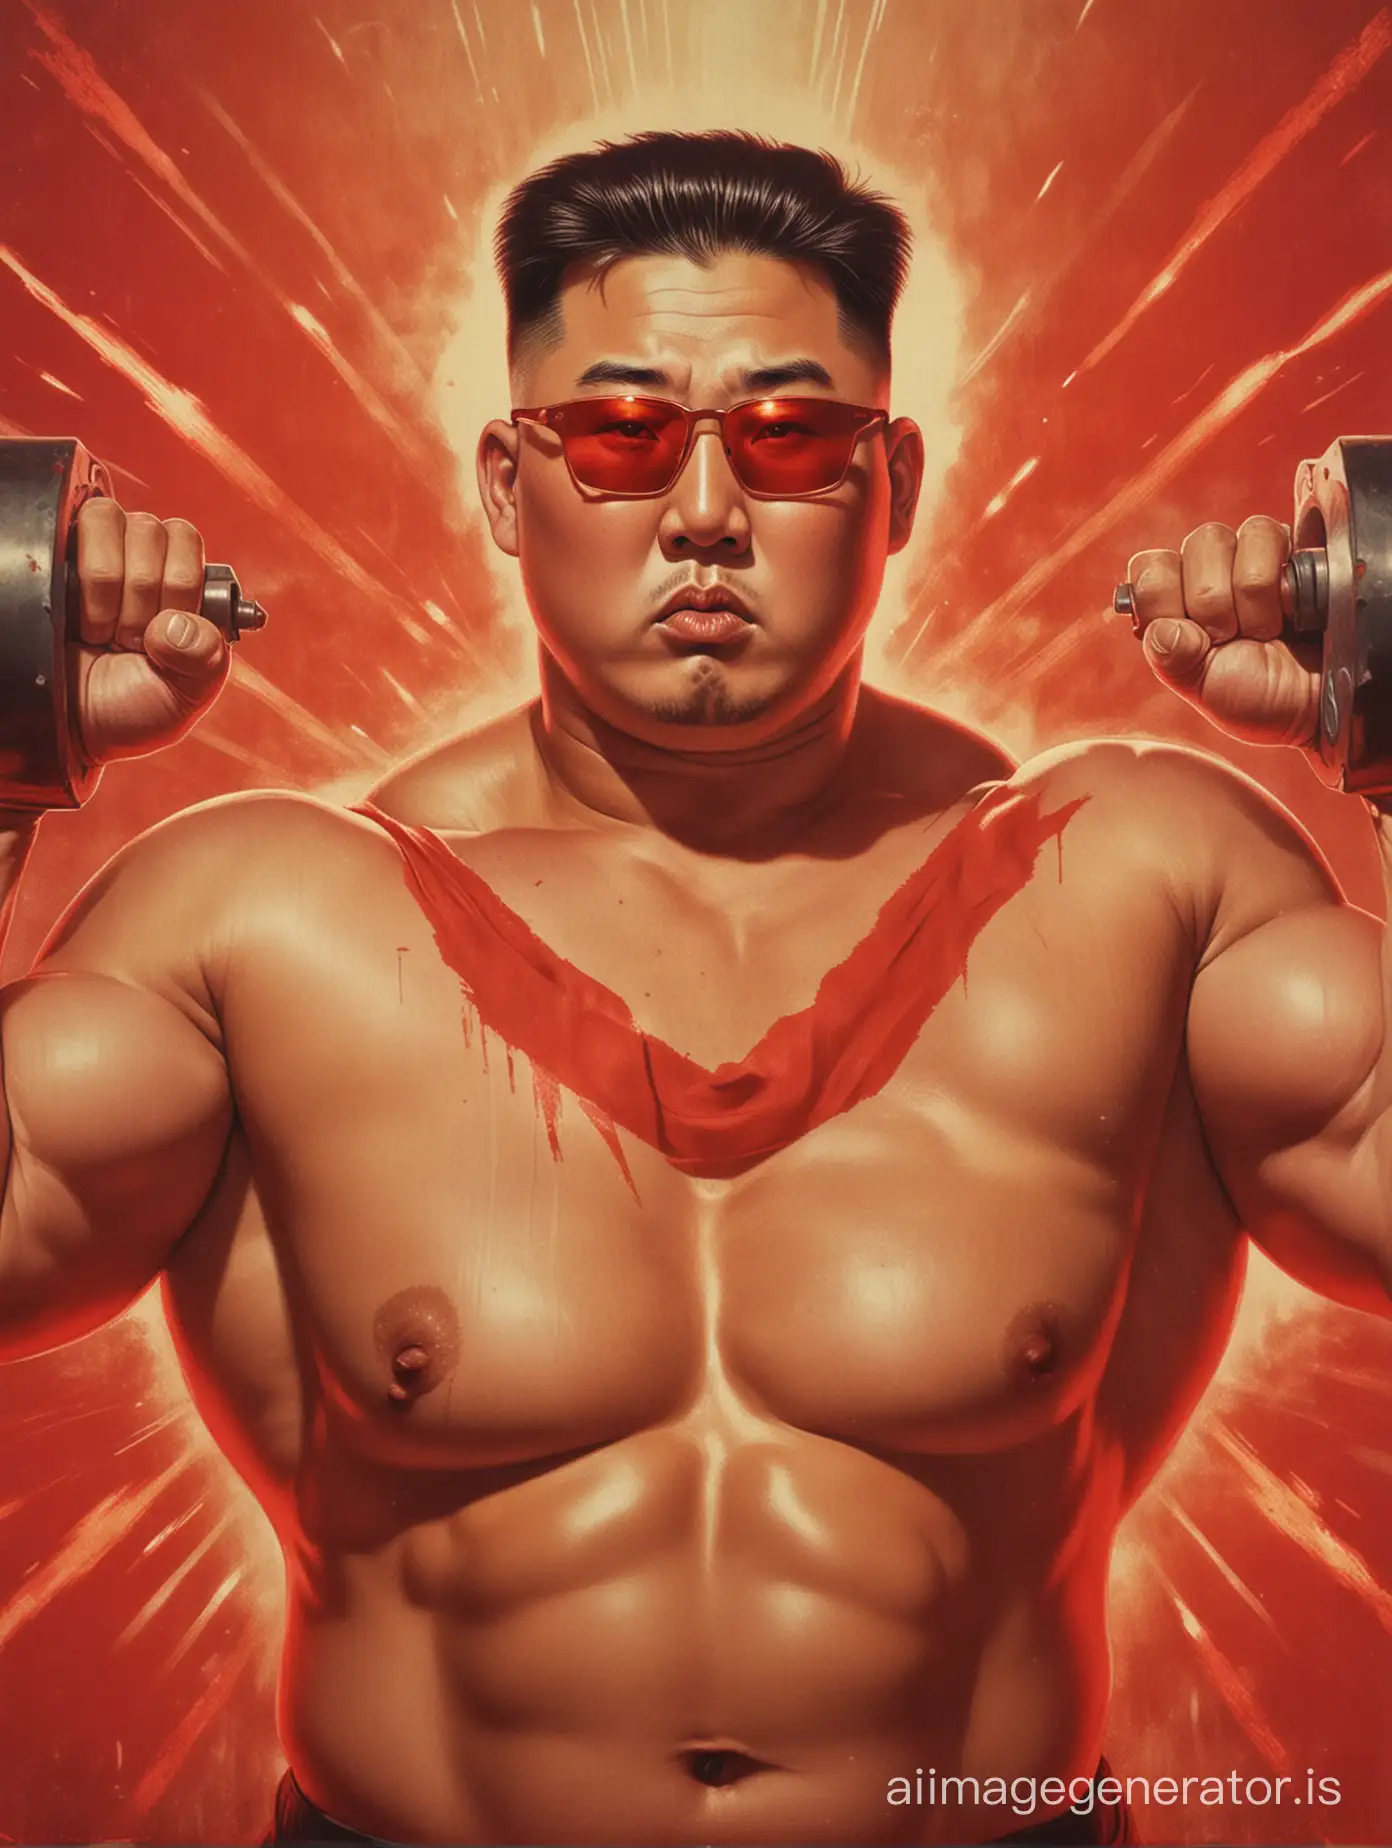 Portrait of Kim jong un as a bodybuilder with red lasers shining out of his eyes, in the style of a vintage North Korean communist propaganda poster